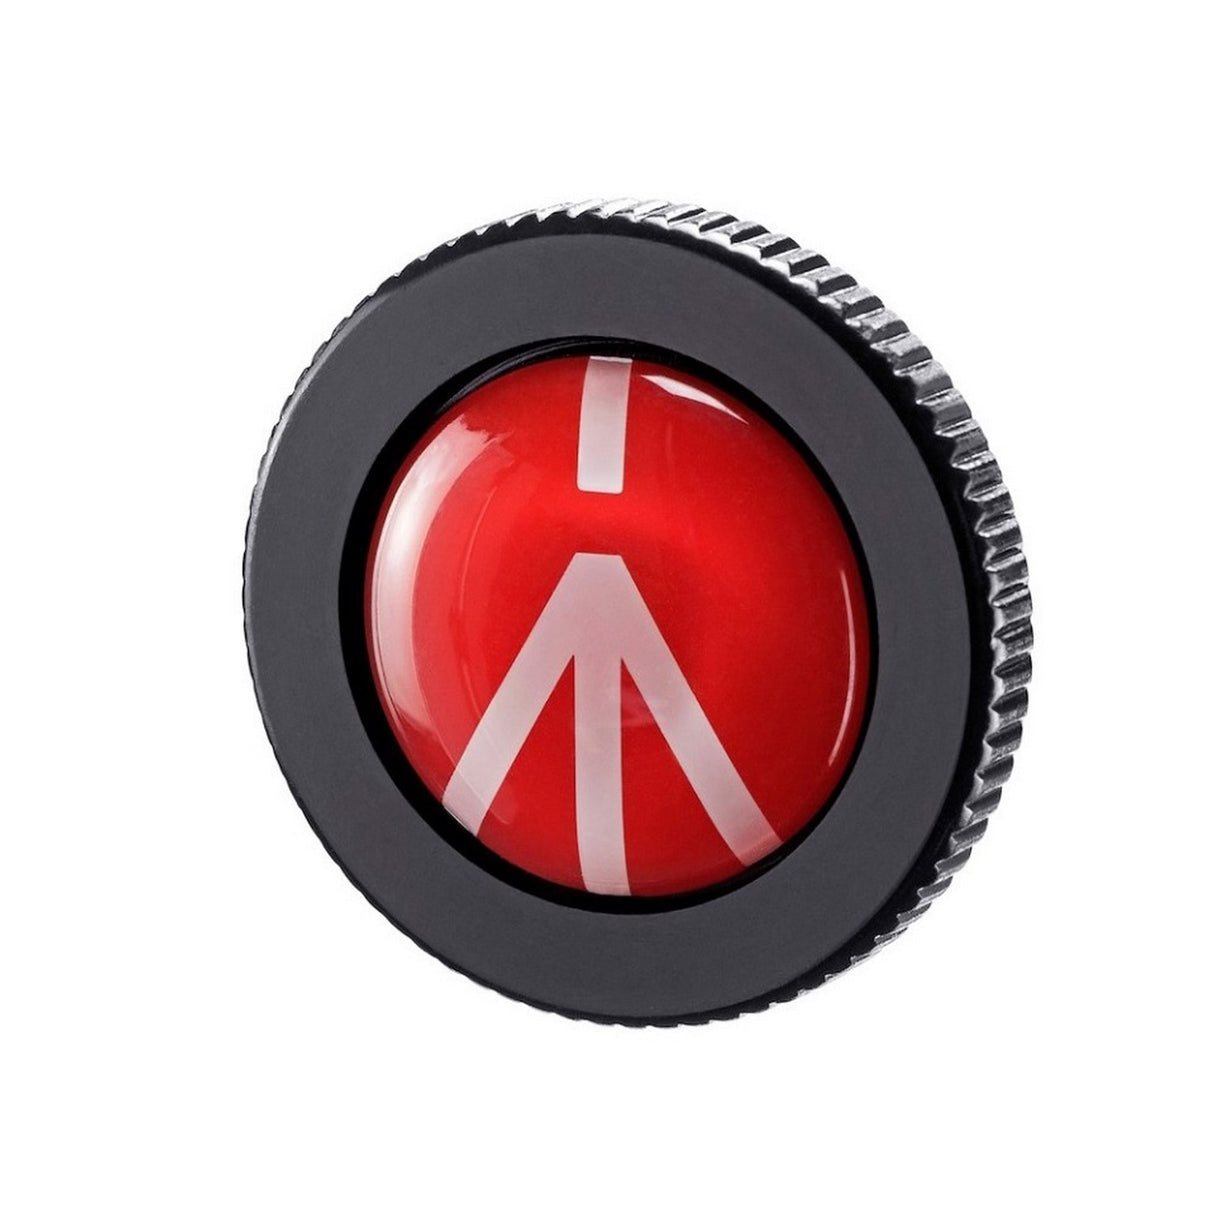 Manfrotto RROUND-PL Round Quick Release Plate for Compact Action